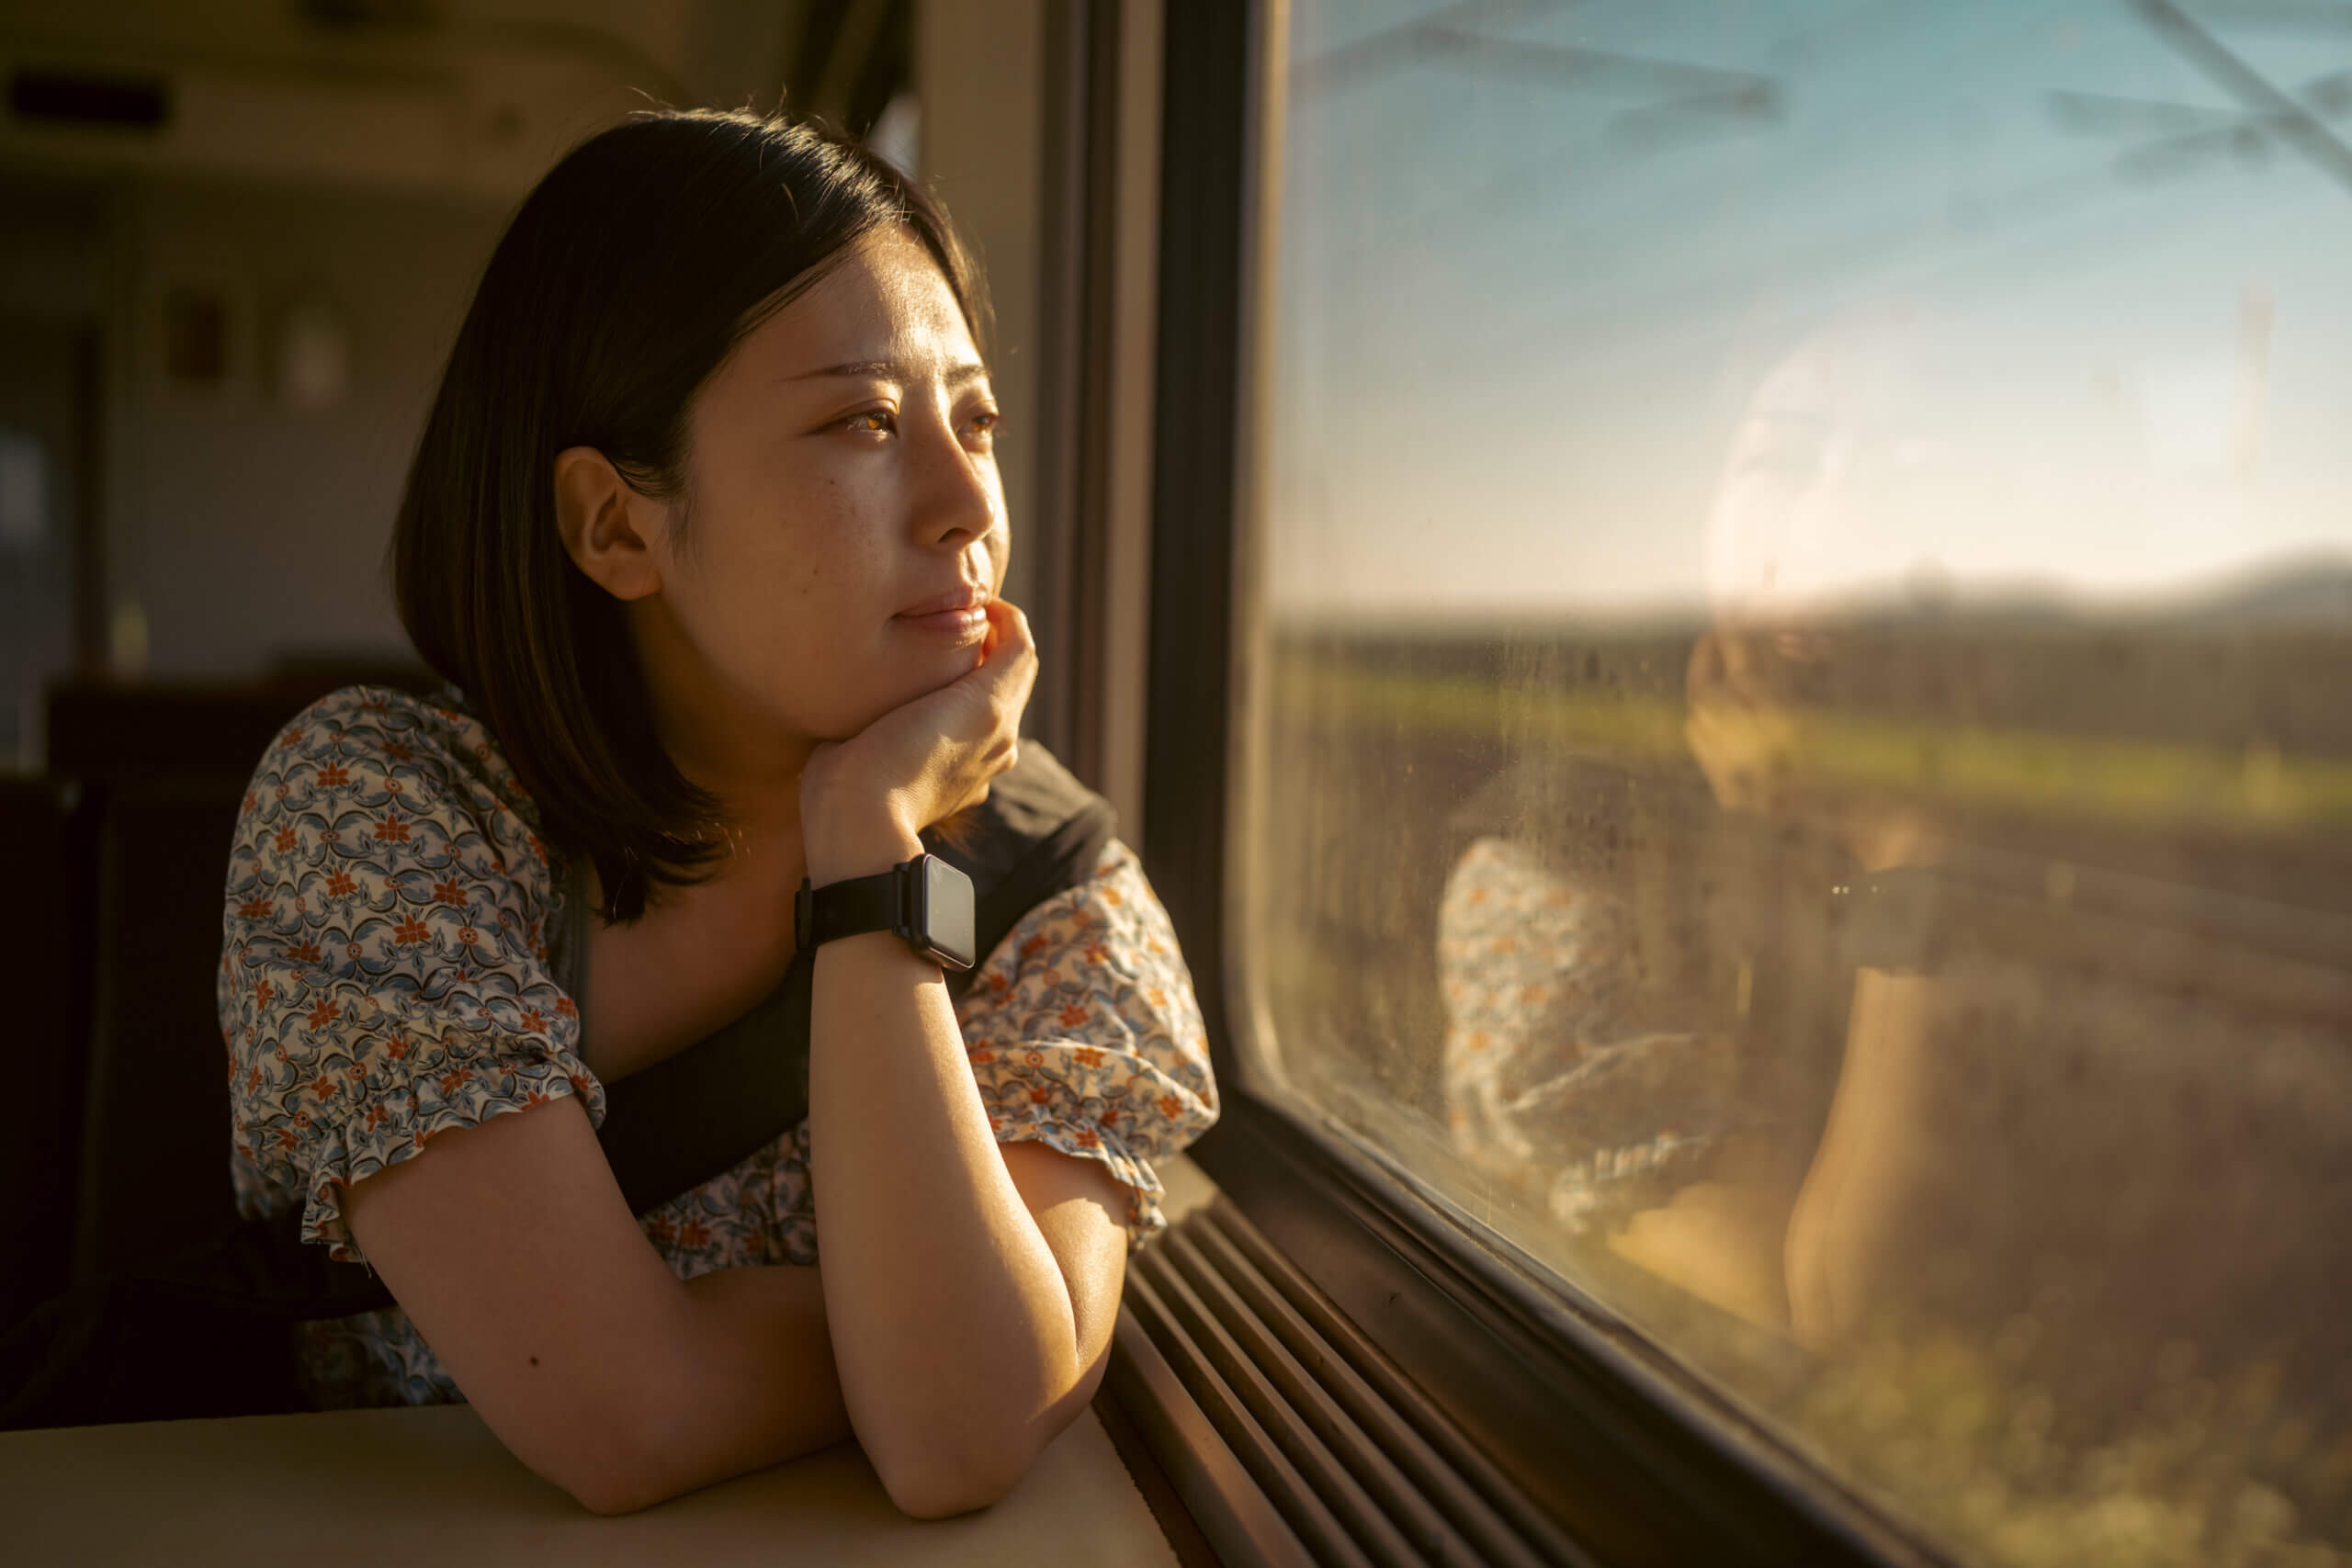 Portrait of a female traveler staring out the window of a train during a sunny afternoon.